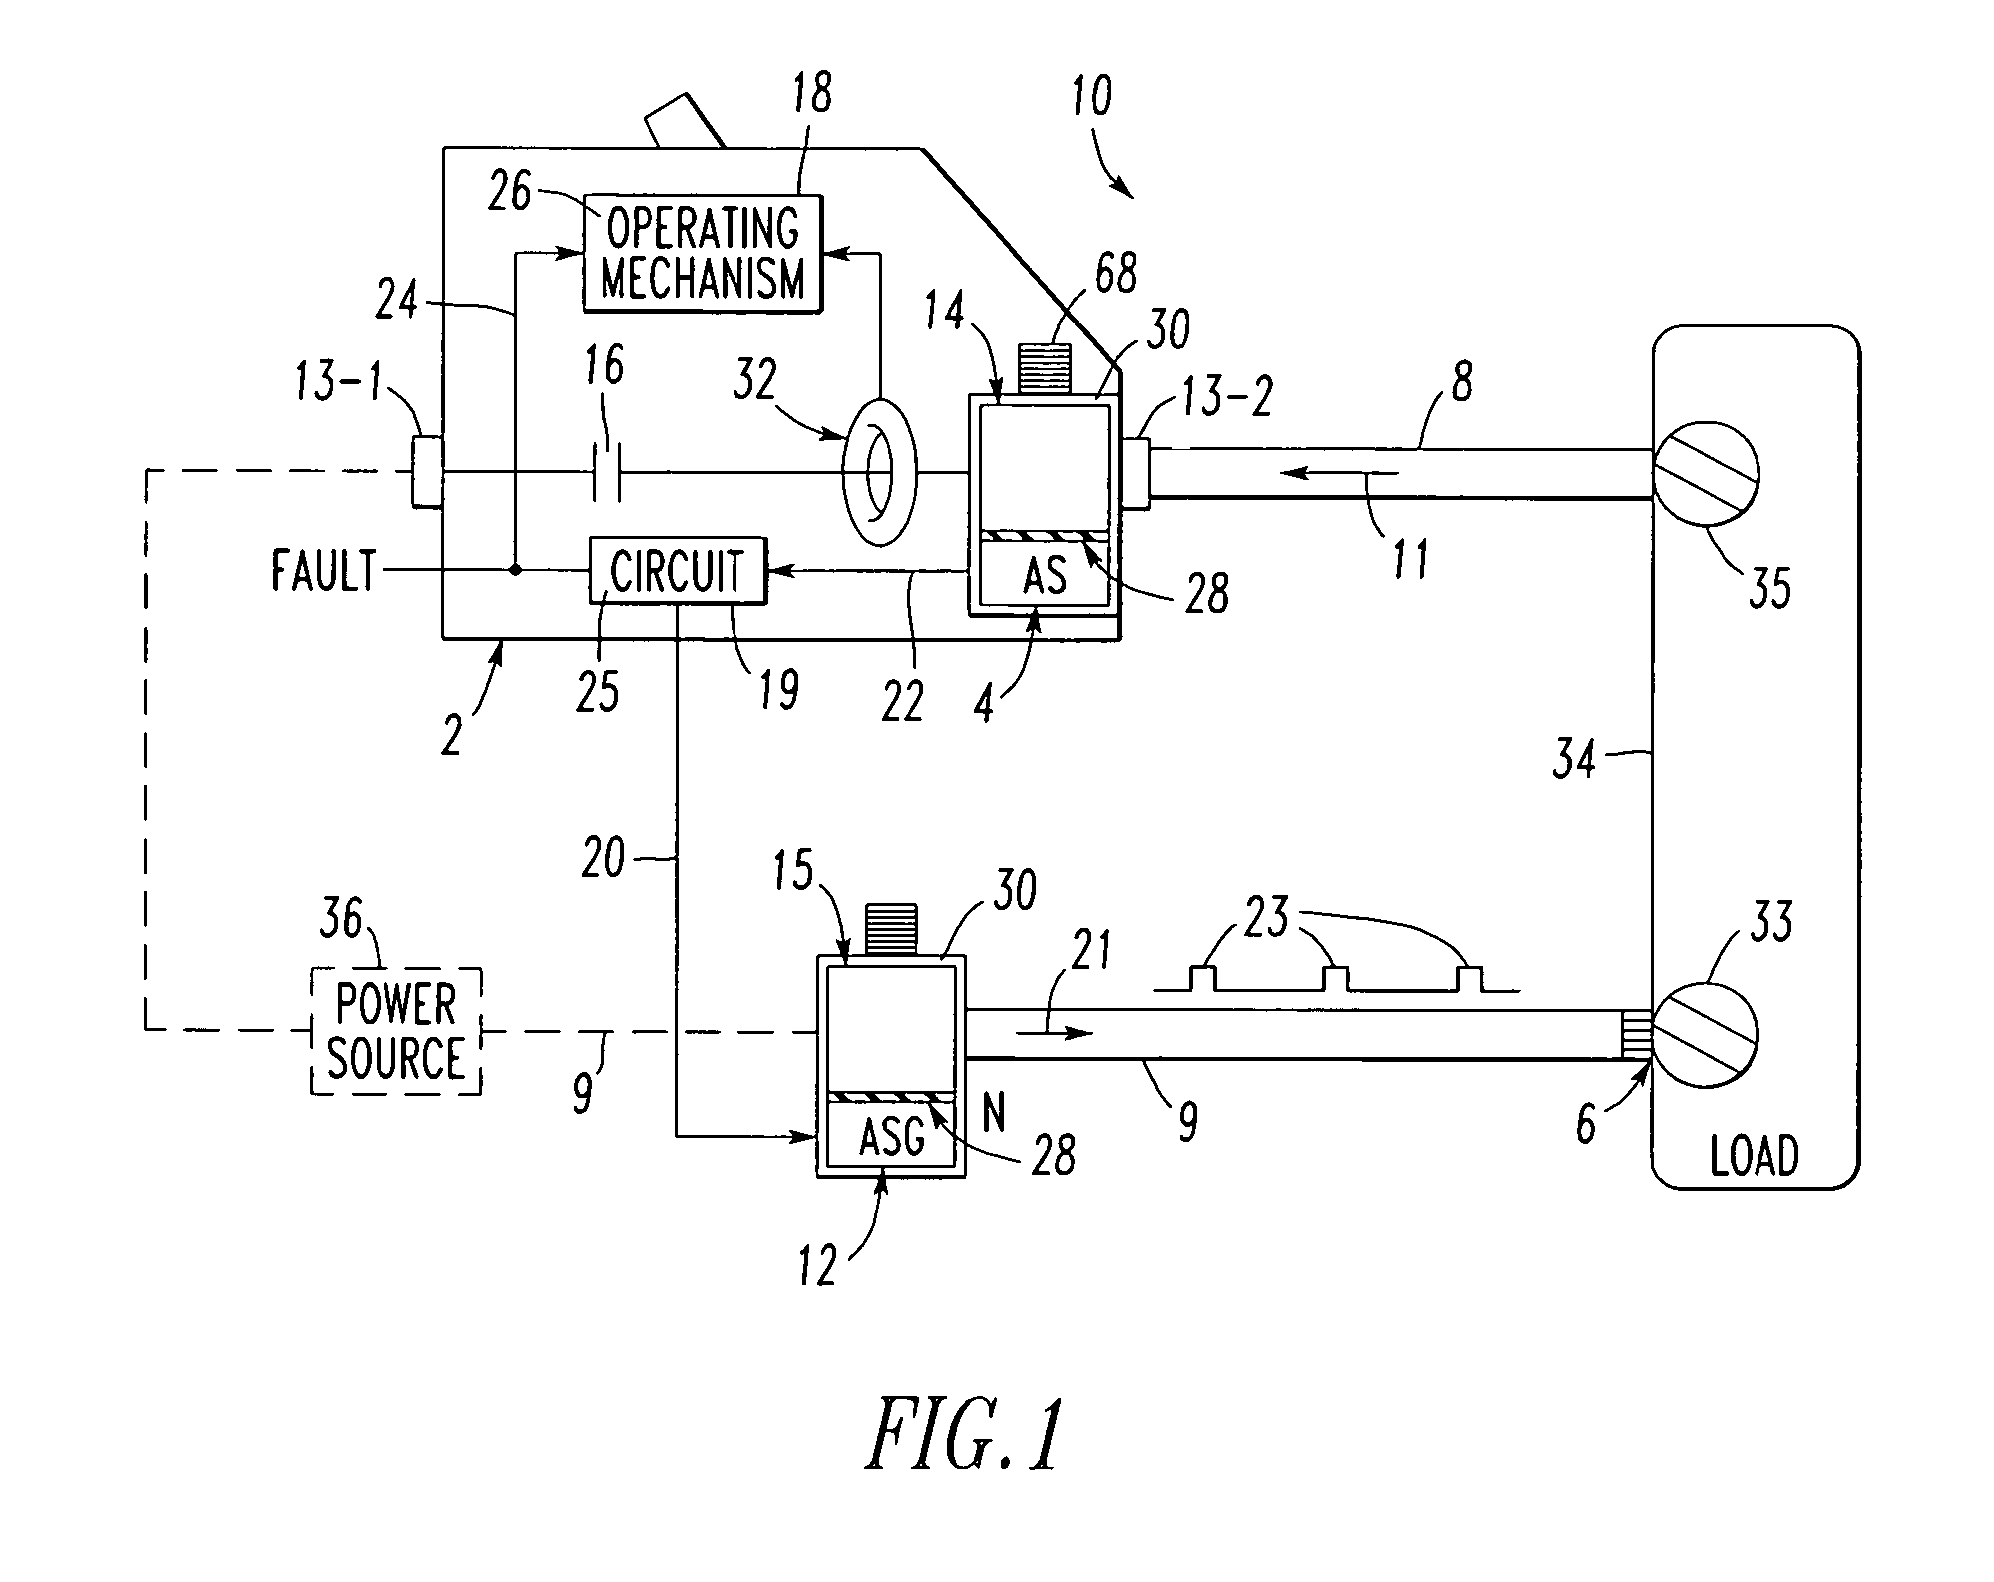 Electrical switching apparatus and method employing active acoustic sensing to detect an electrical conductivity fault of a power circuit